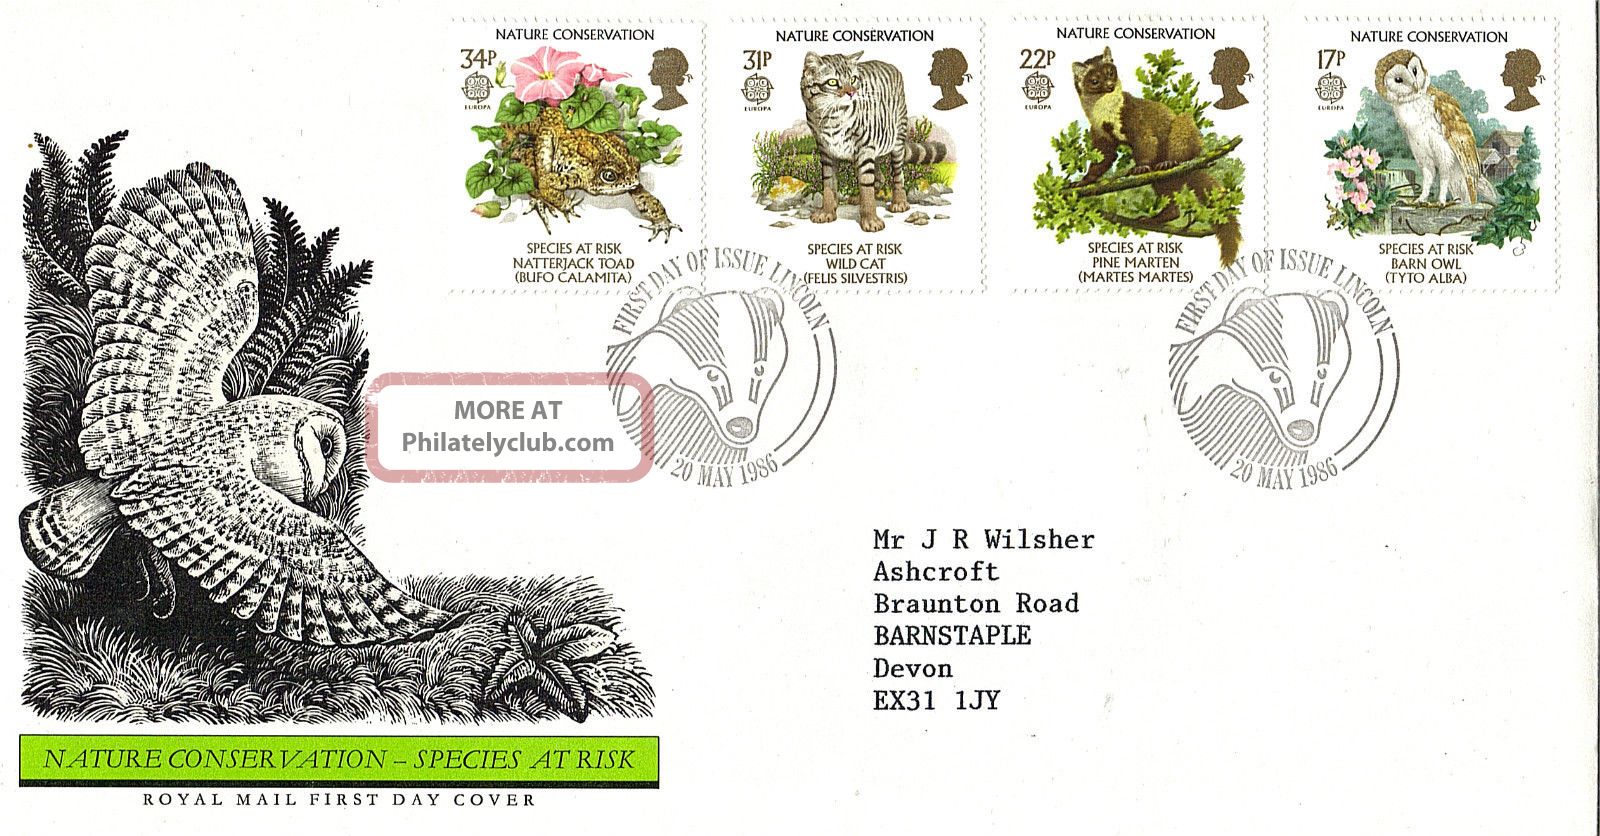 20 May 1986 Nature Conservation Royal Mail First Day Cover Lincoln Shs (a) Animal Kingdom photo